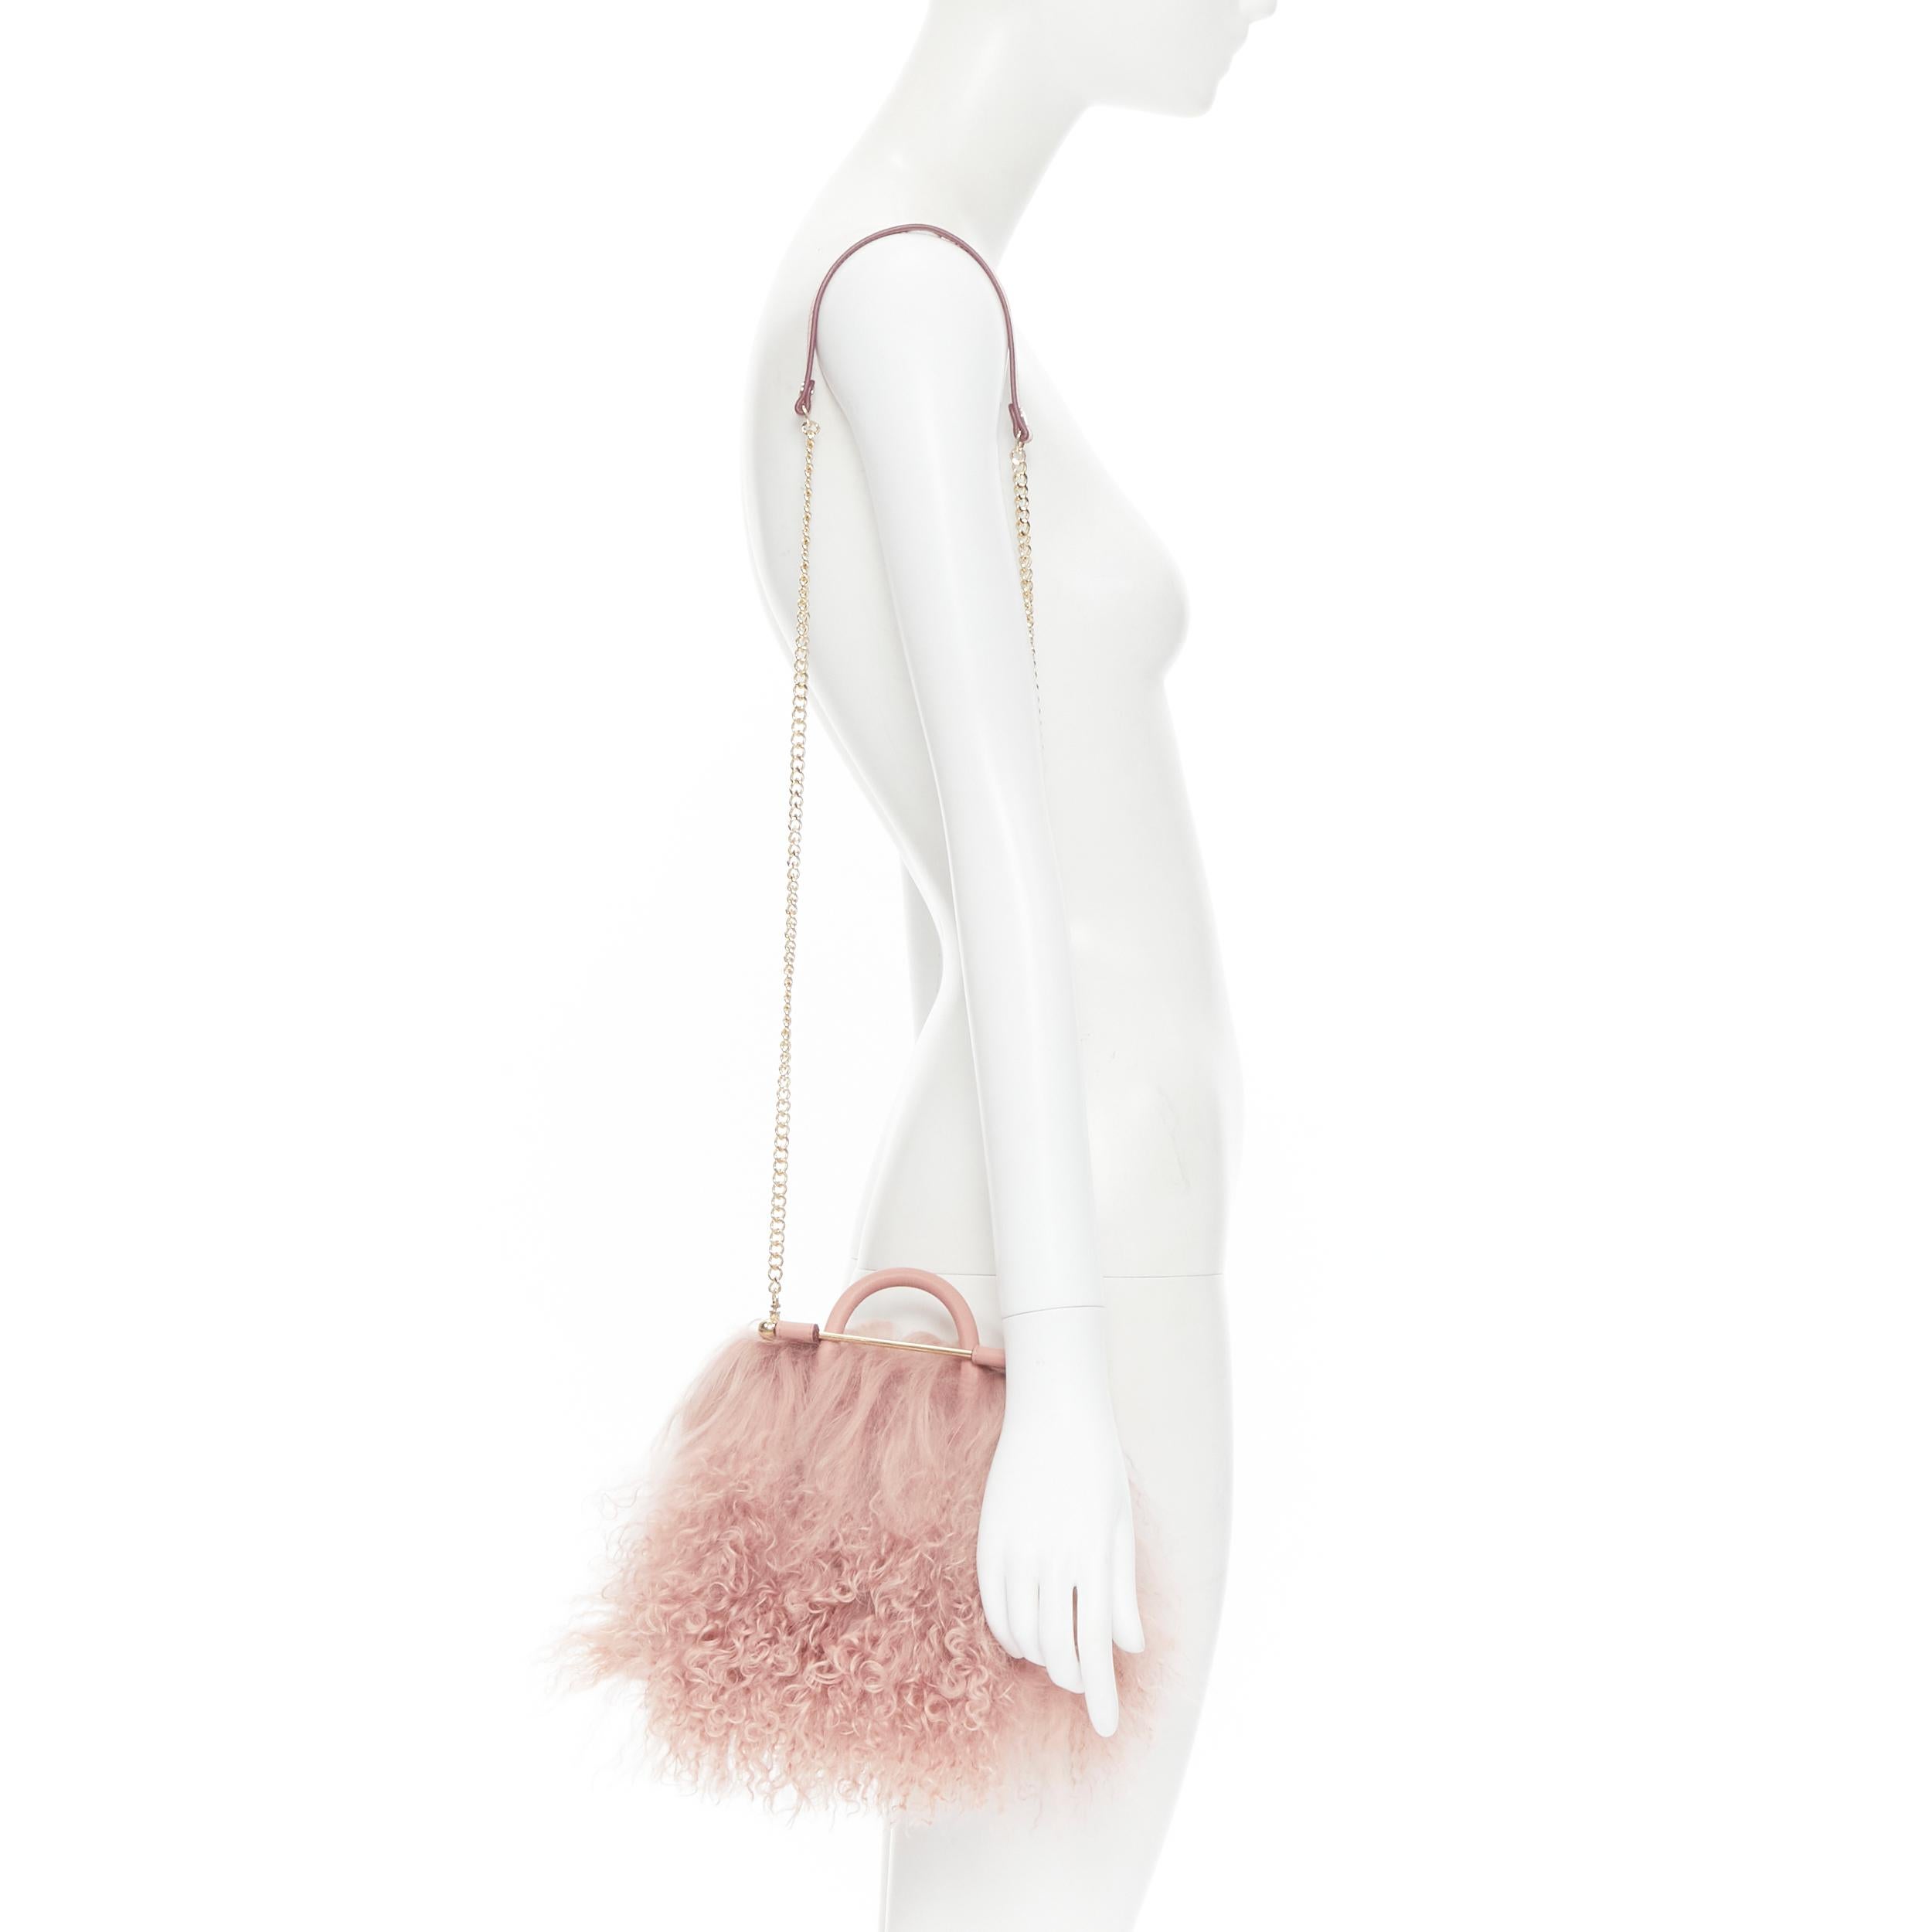 new STRATHBERRY blush pink Mongolian long shearling fur gold bar crossbody bag 
Reference: TGAS/B01174 
Brand: Strathberry 
Model: Mongolian Shearling bag 
Material: Fur 
Color: Pink 
Pattern: Solid 
Extra Detail: Gold bar closure. Rose pink long